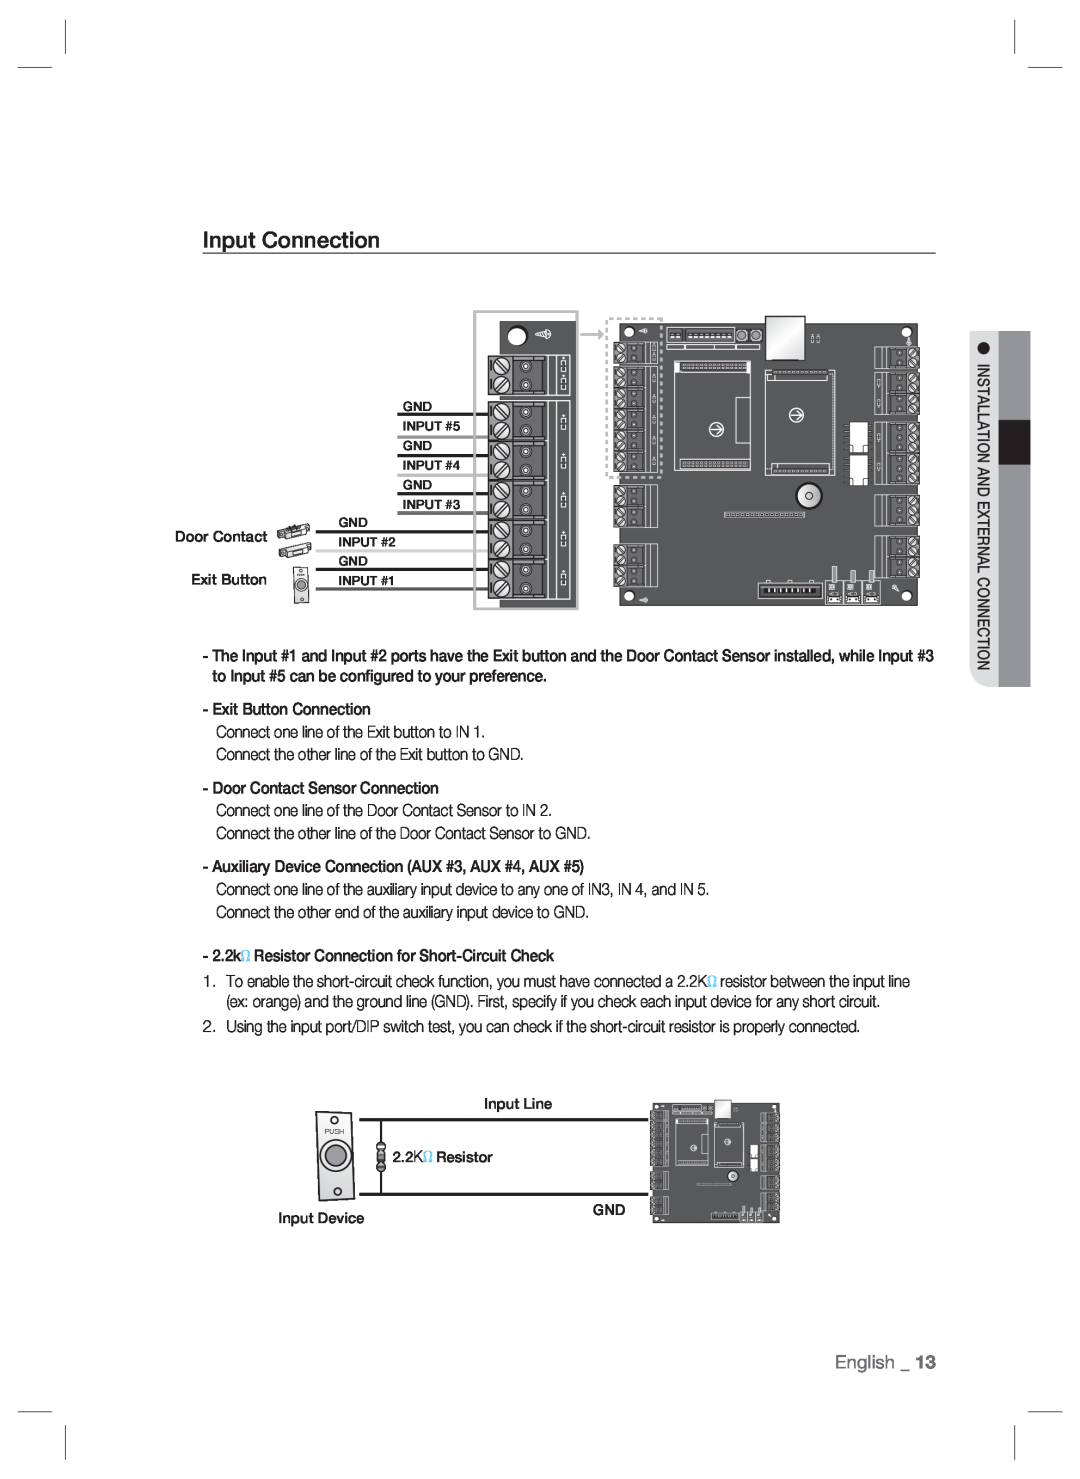 Samsung SSA-P102T user manual Input Connection, English 